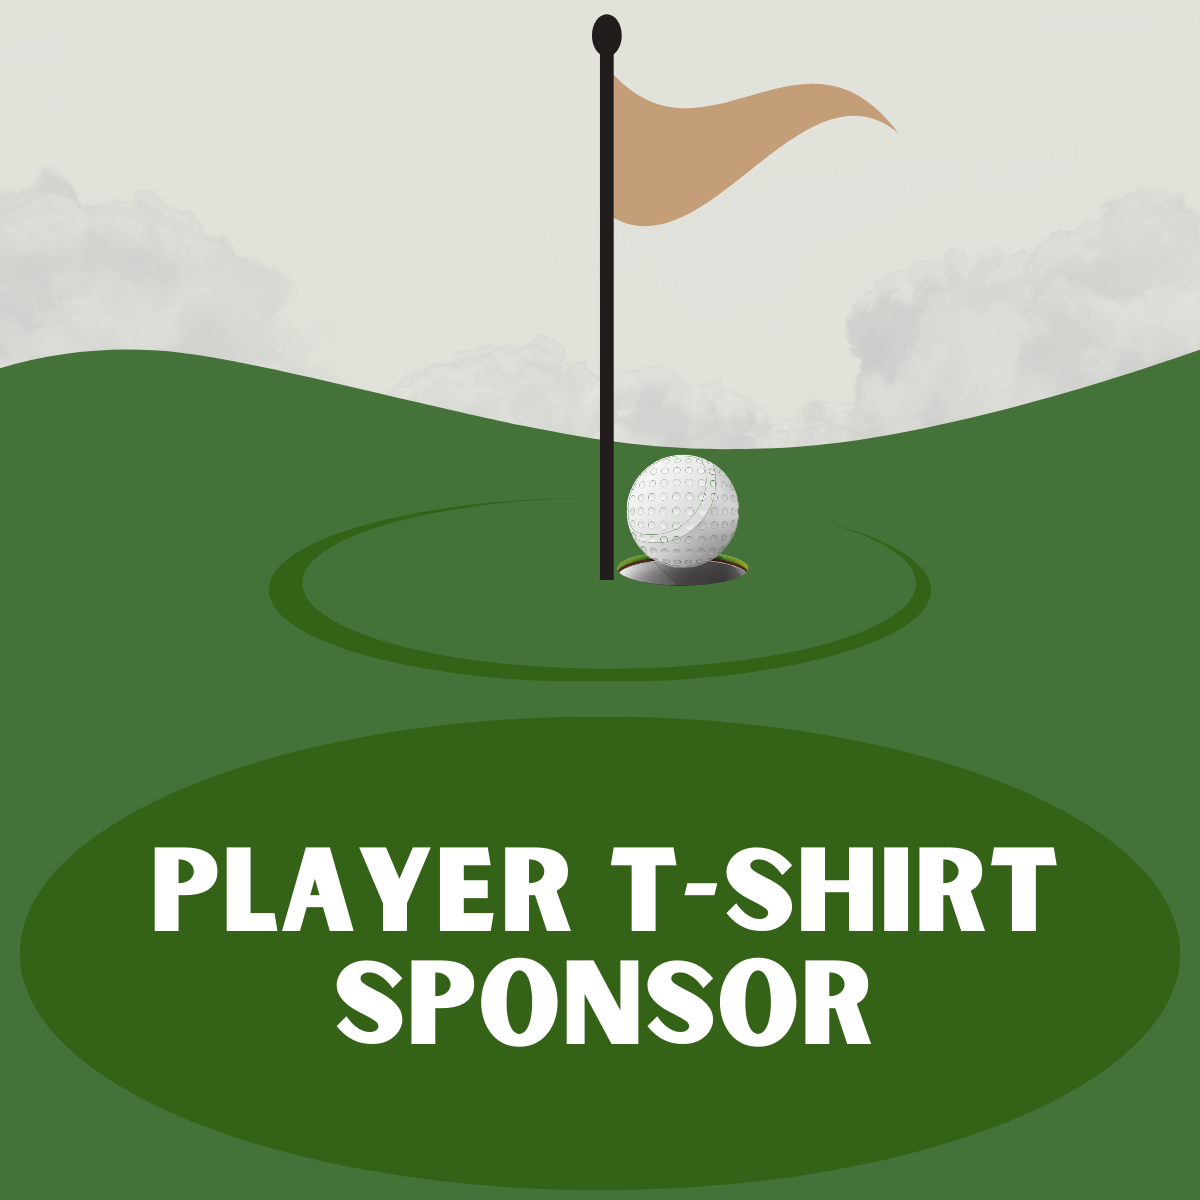 Player T-Shirt Sponsor - New Mexico Open